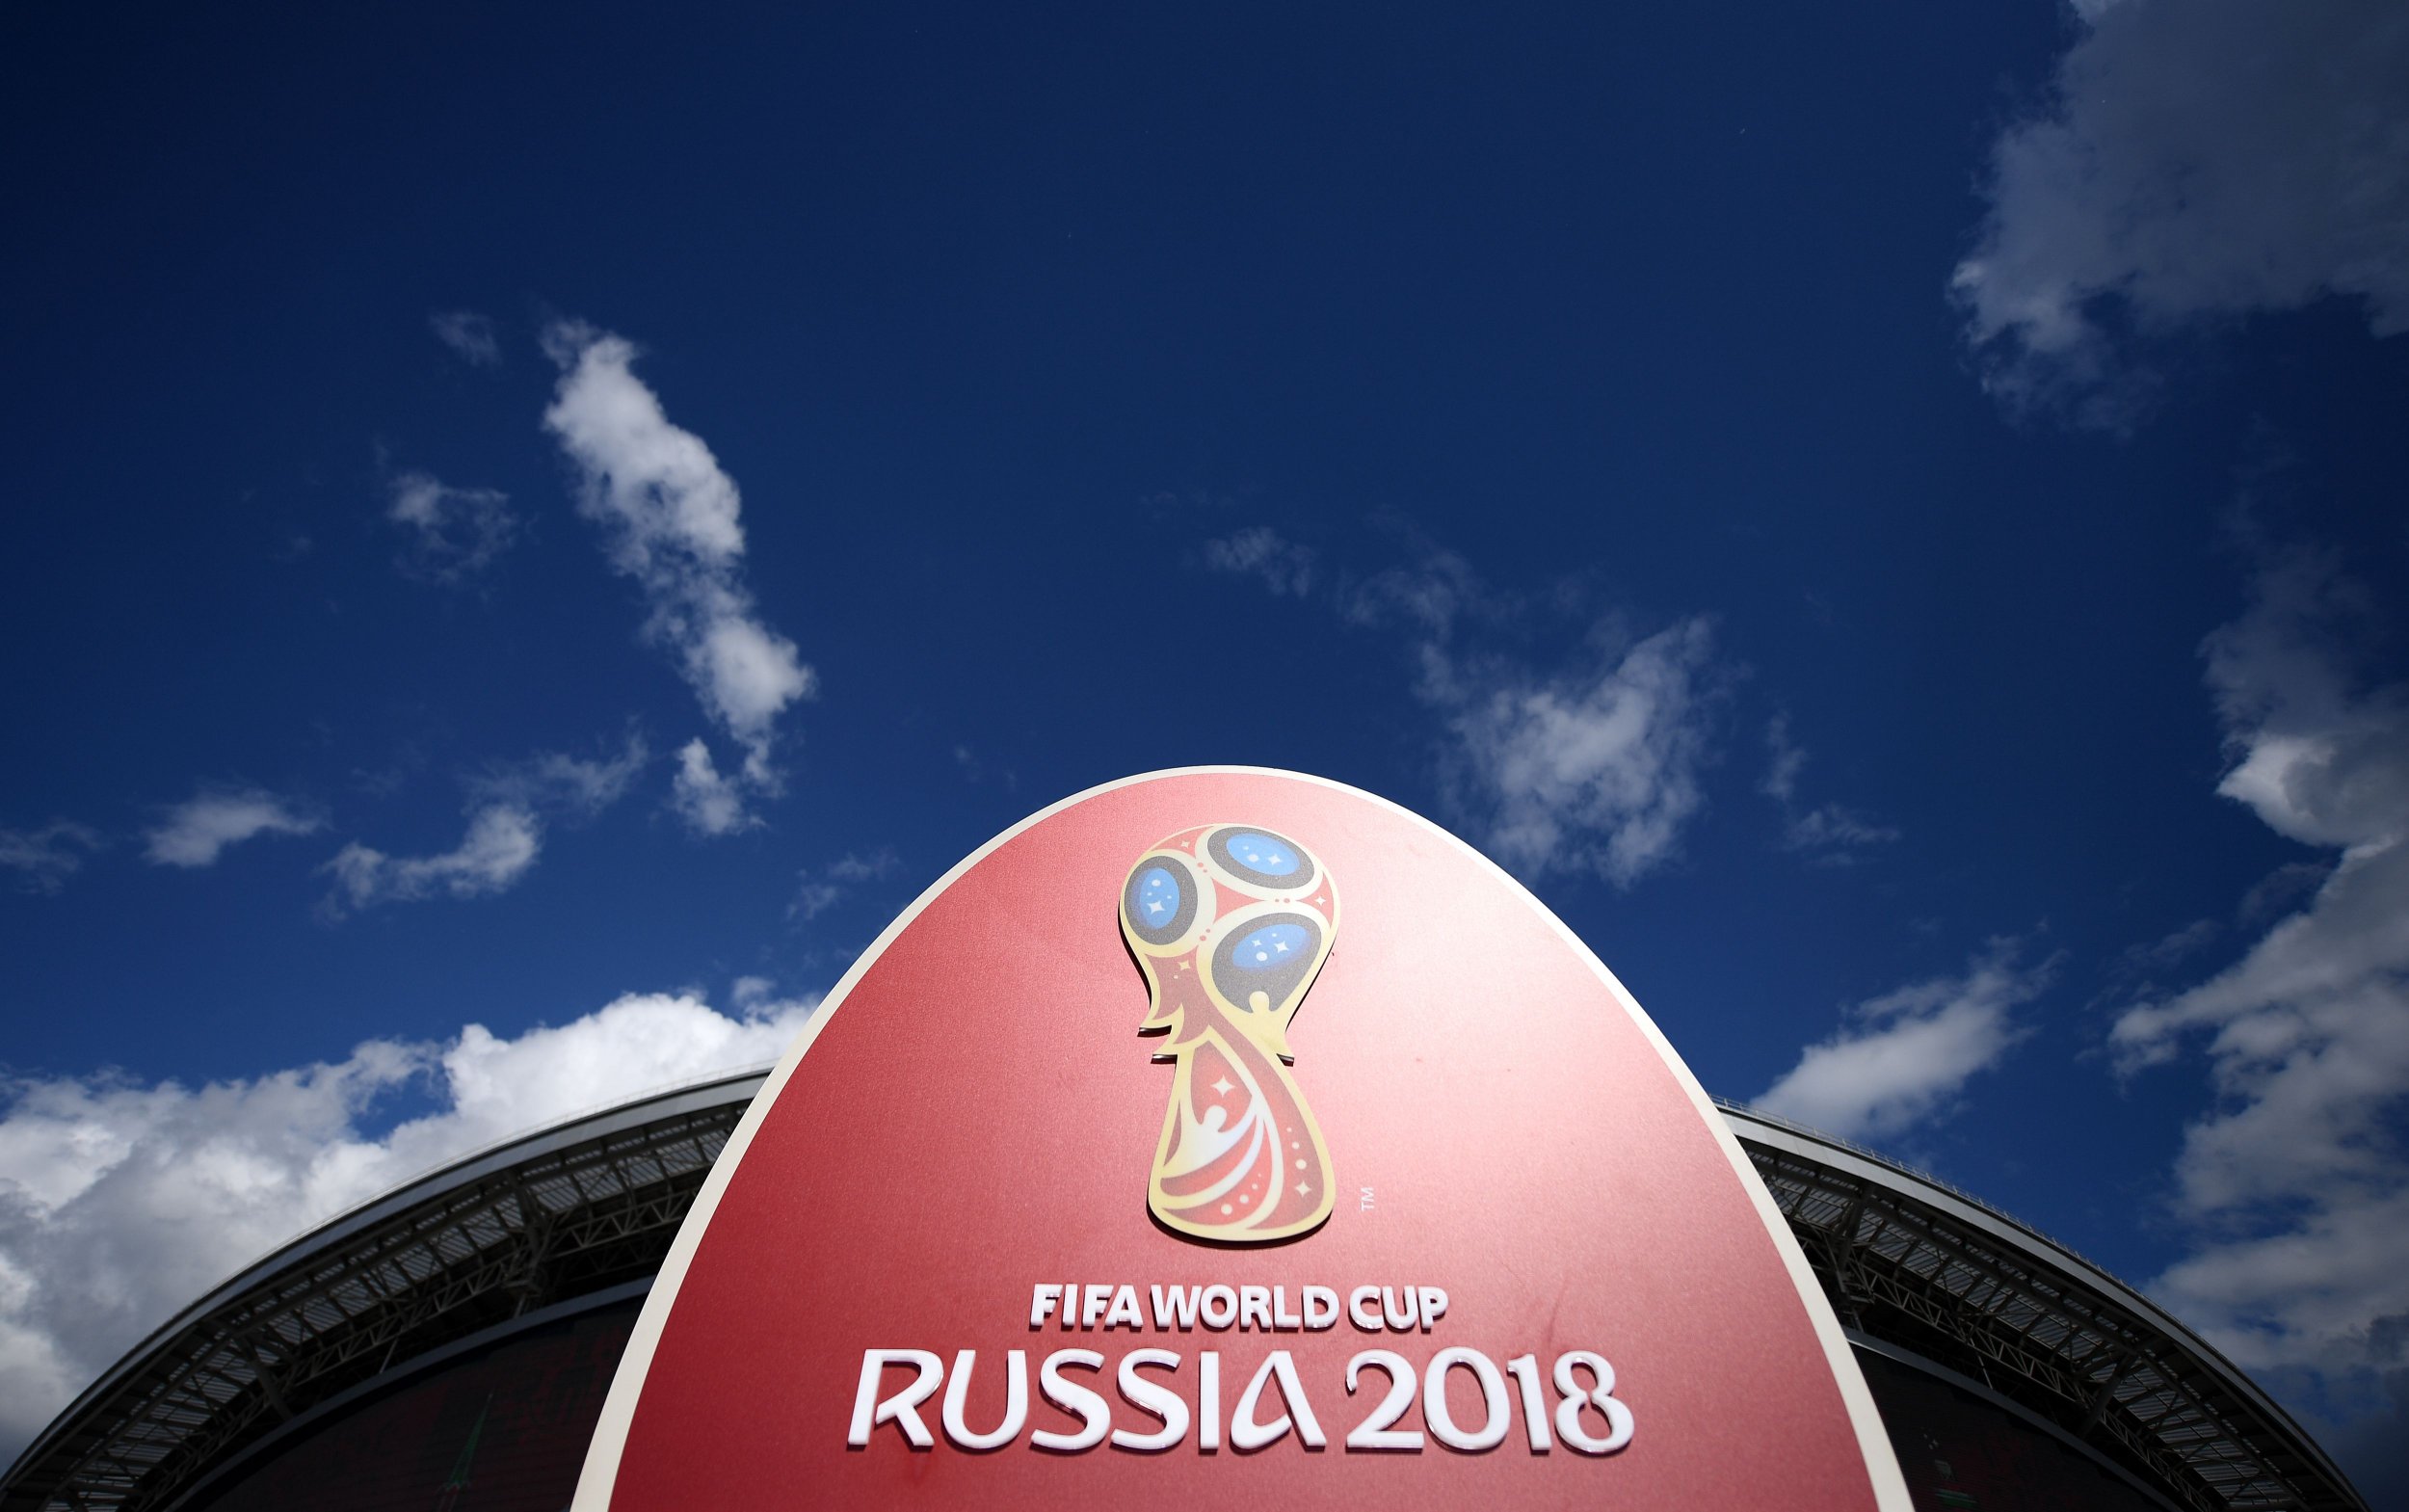 Russia 2018 Live stream Where to Watch the World Cup on TV and Online